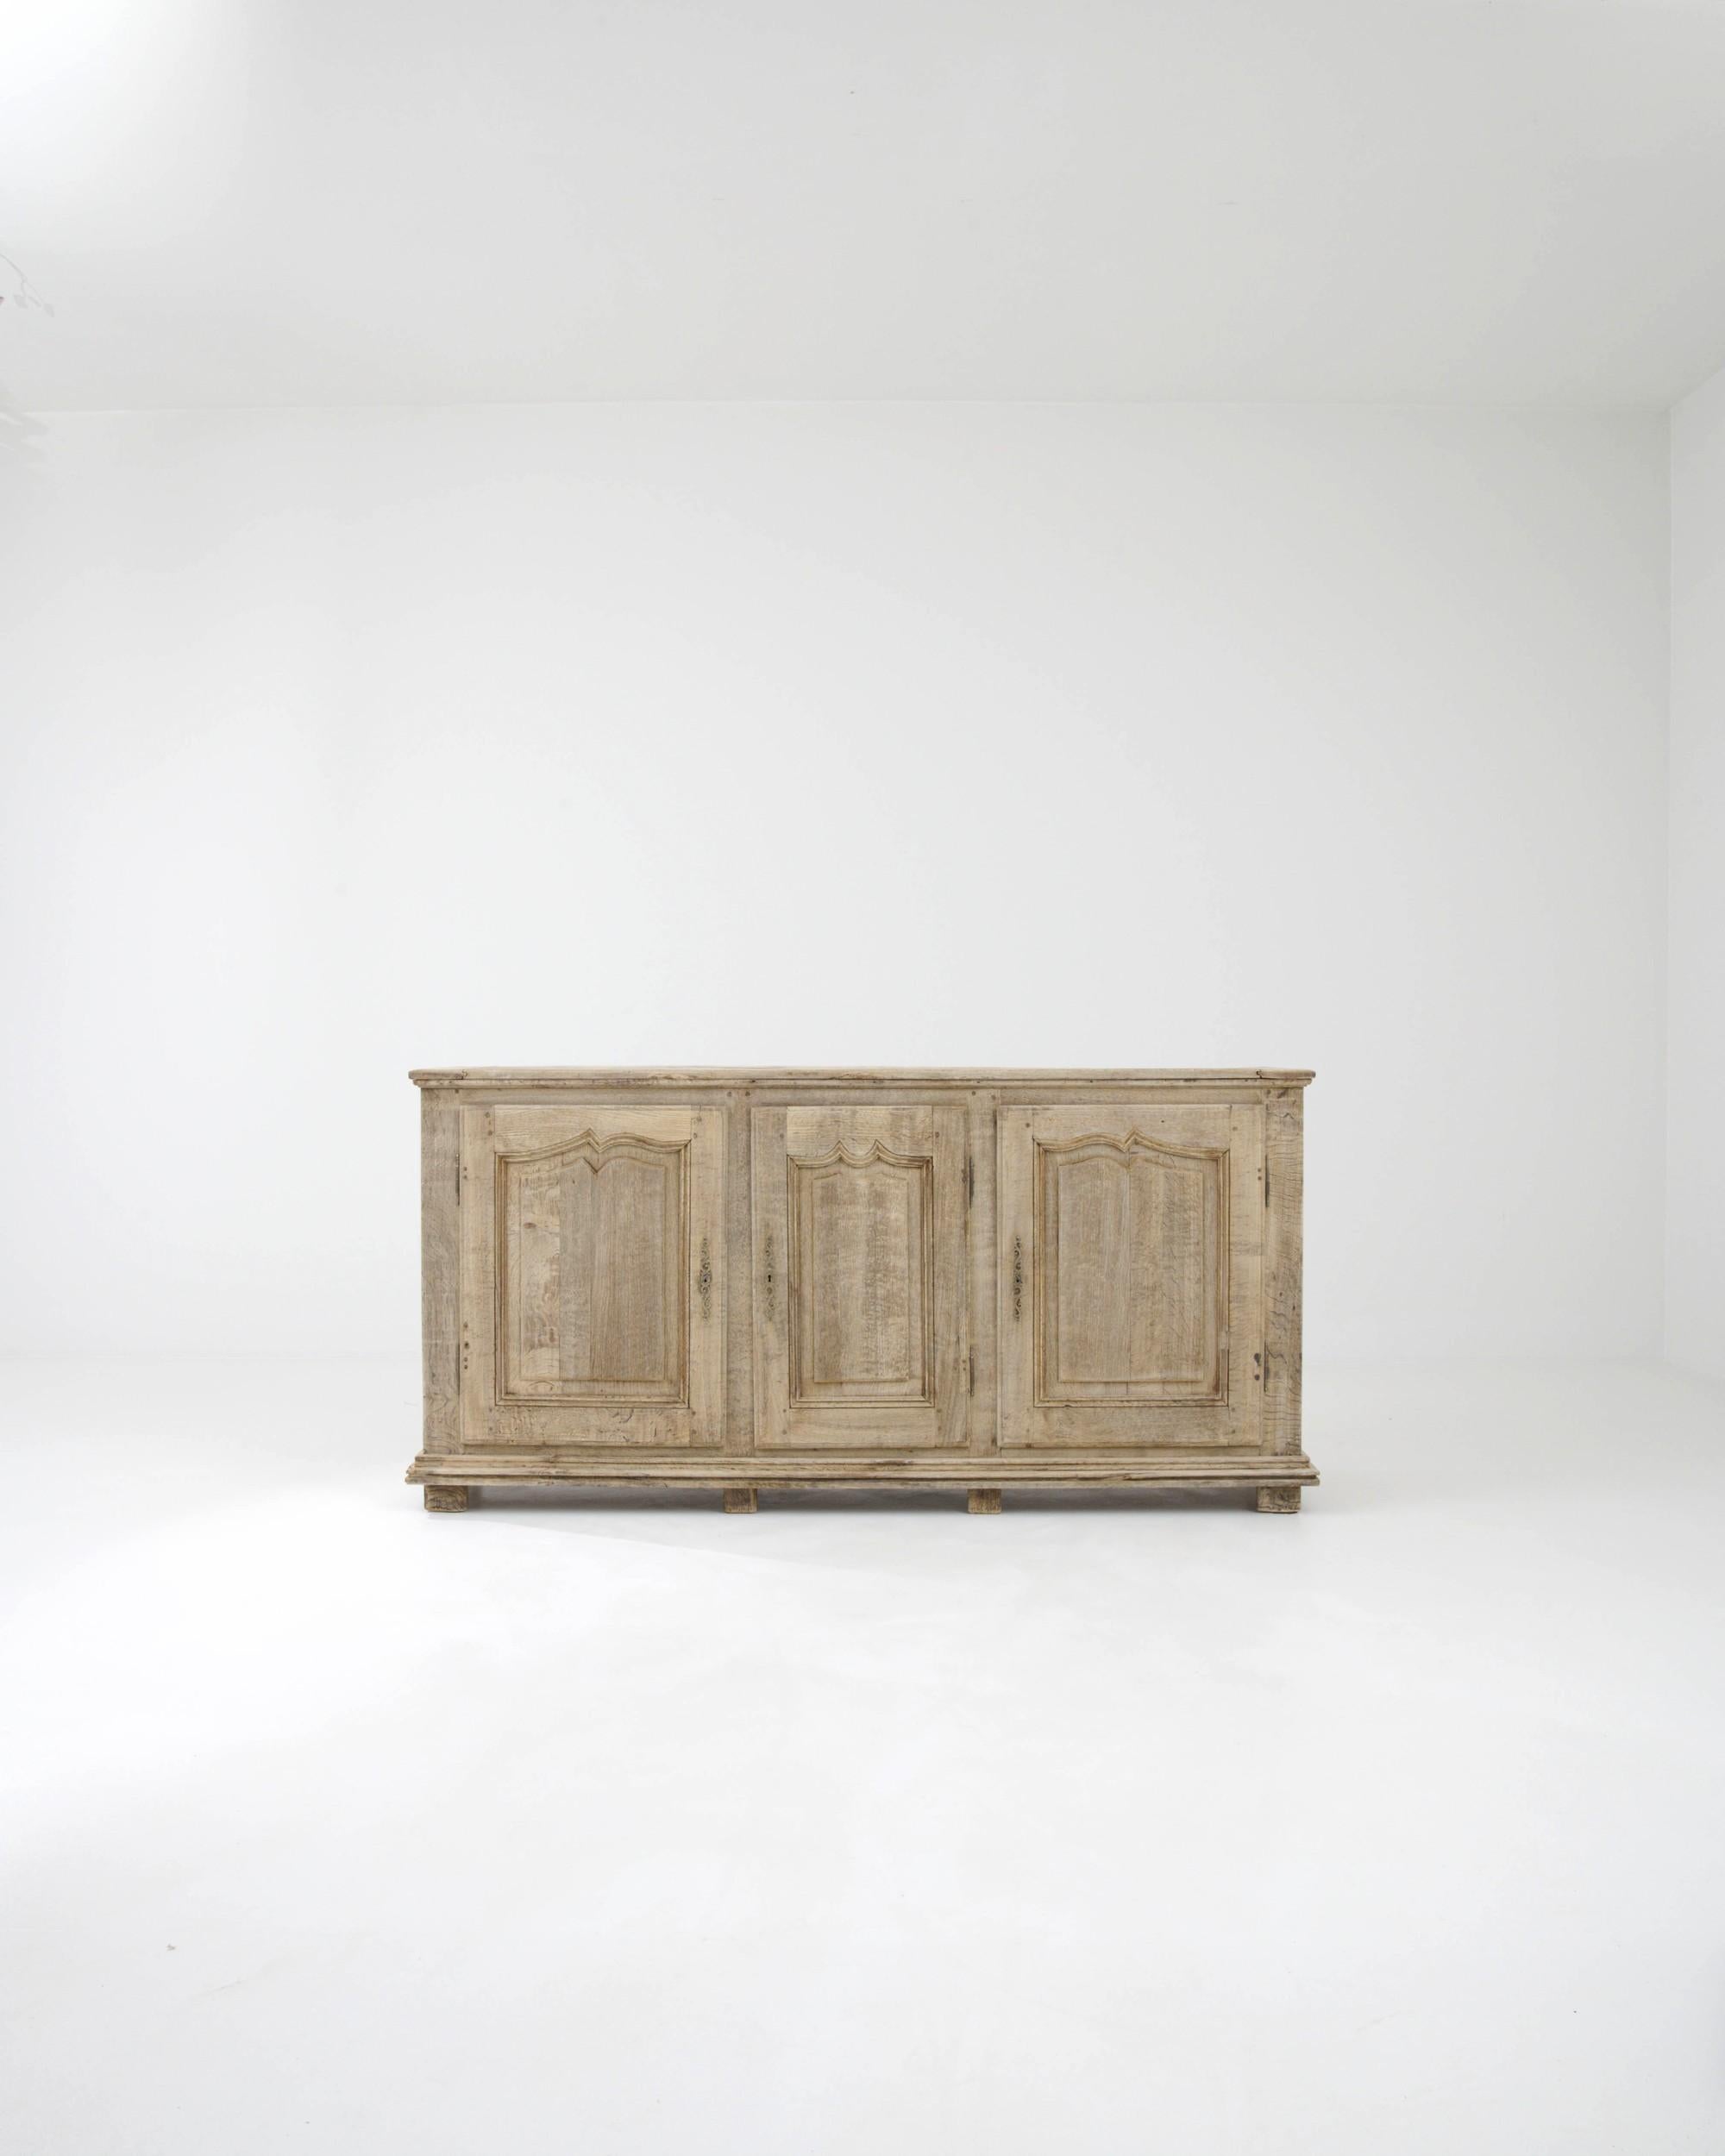 The elegant simplicity of this antique oak buffet gives it a timeless appeal. Made in France in the early 1800s, the cabinet is broad, spacious and sturdily constructed – built with the intention of serving the needs of a Provincial household for